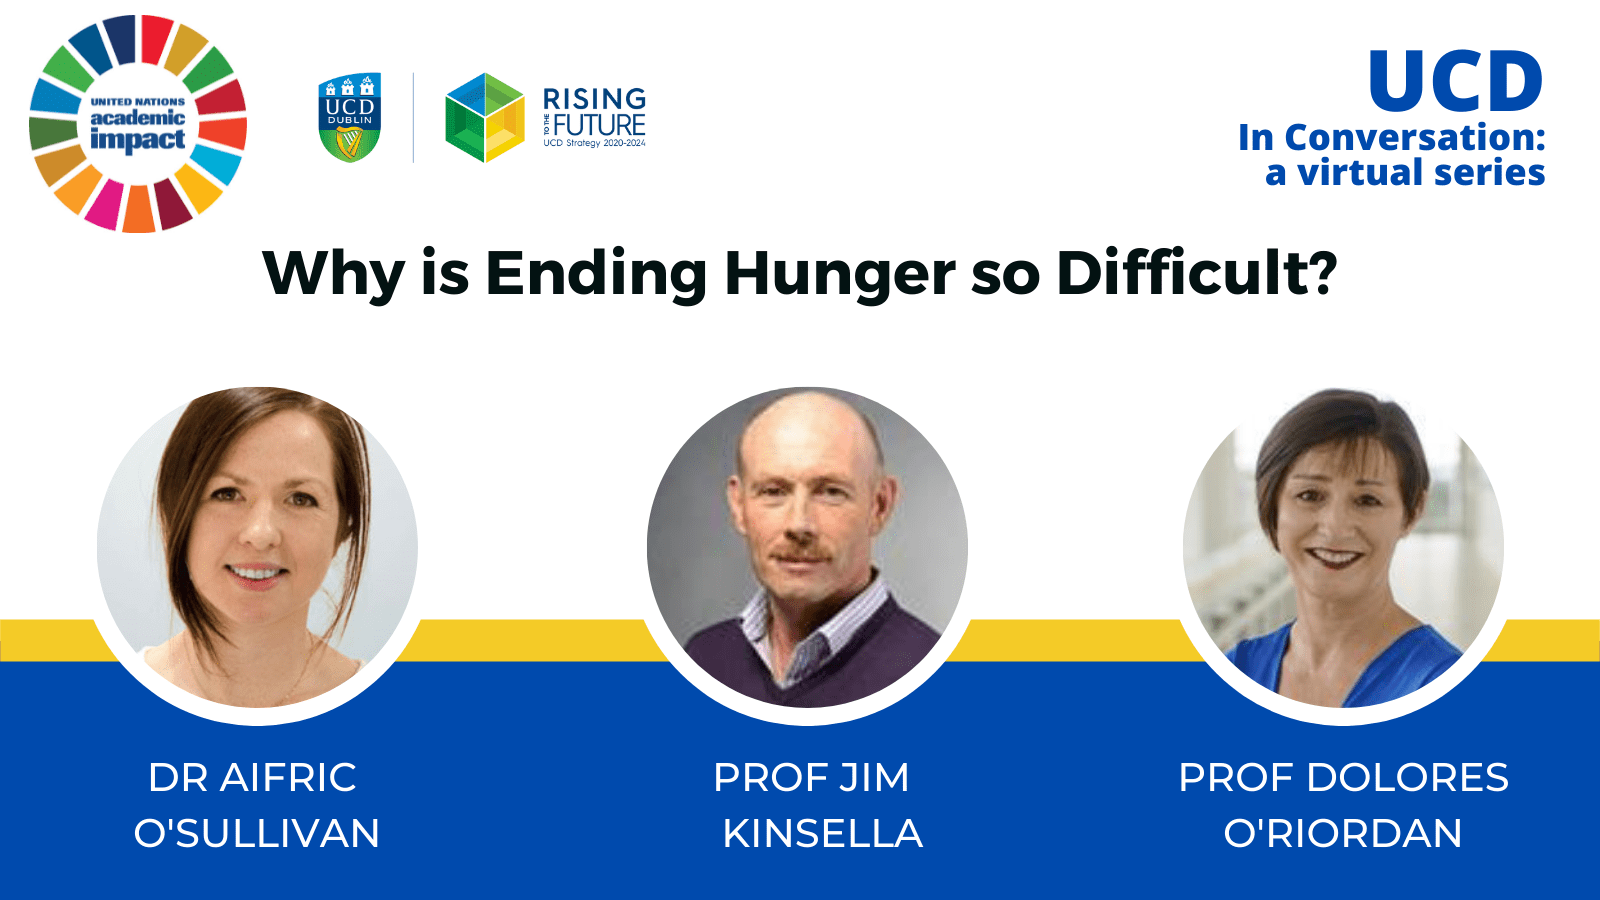 Why is Ending Hunger so Difficult? A UCD conversation